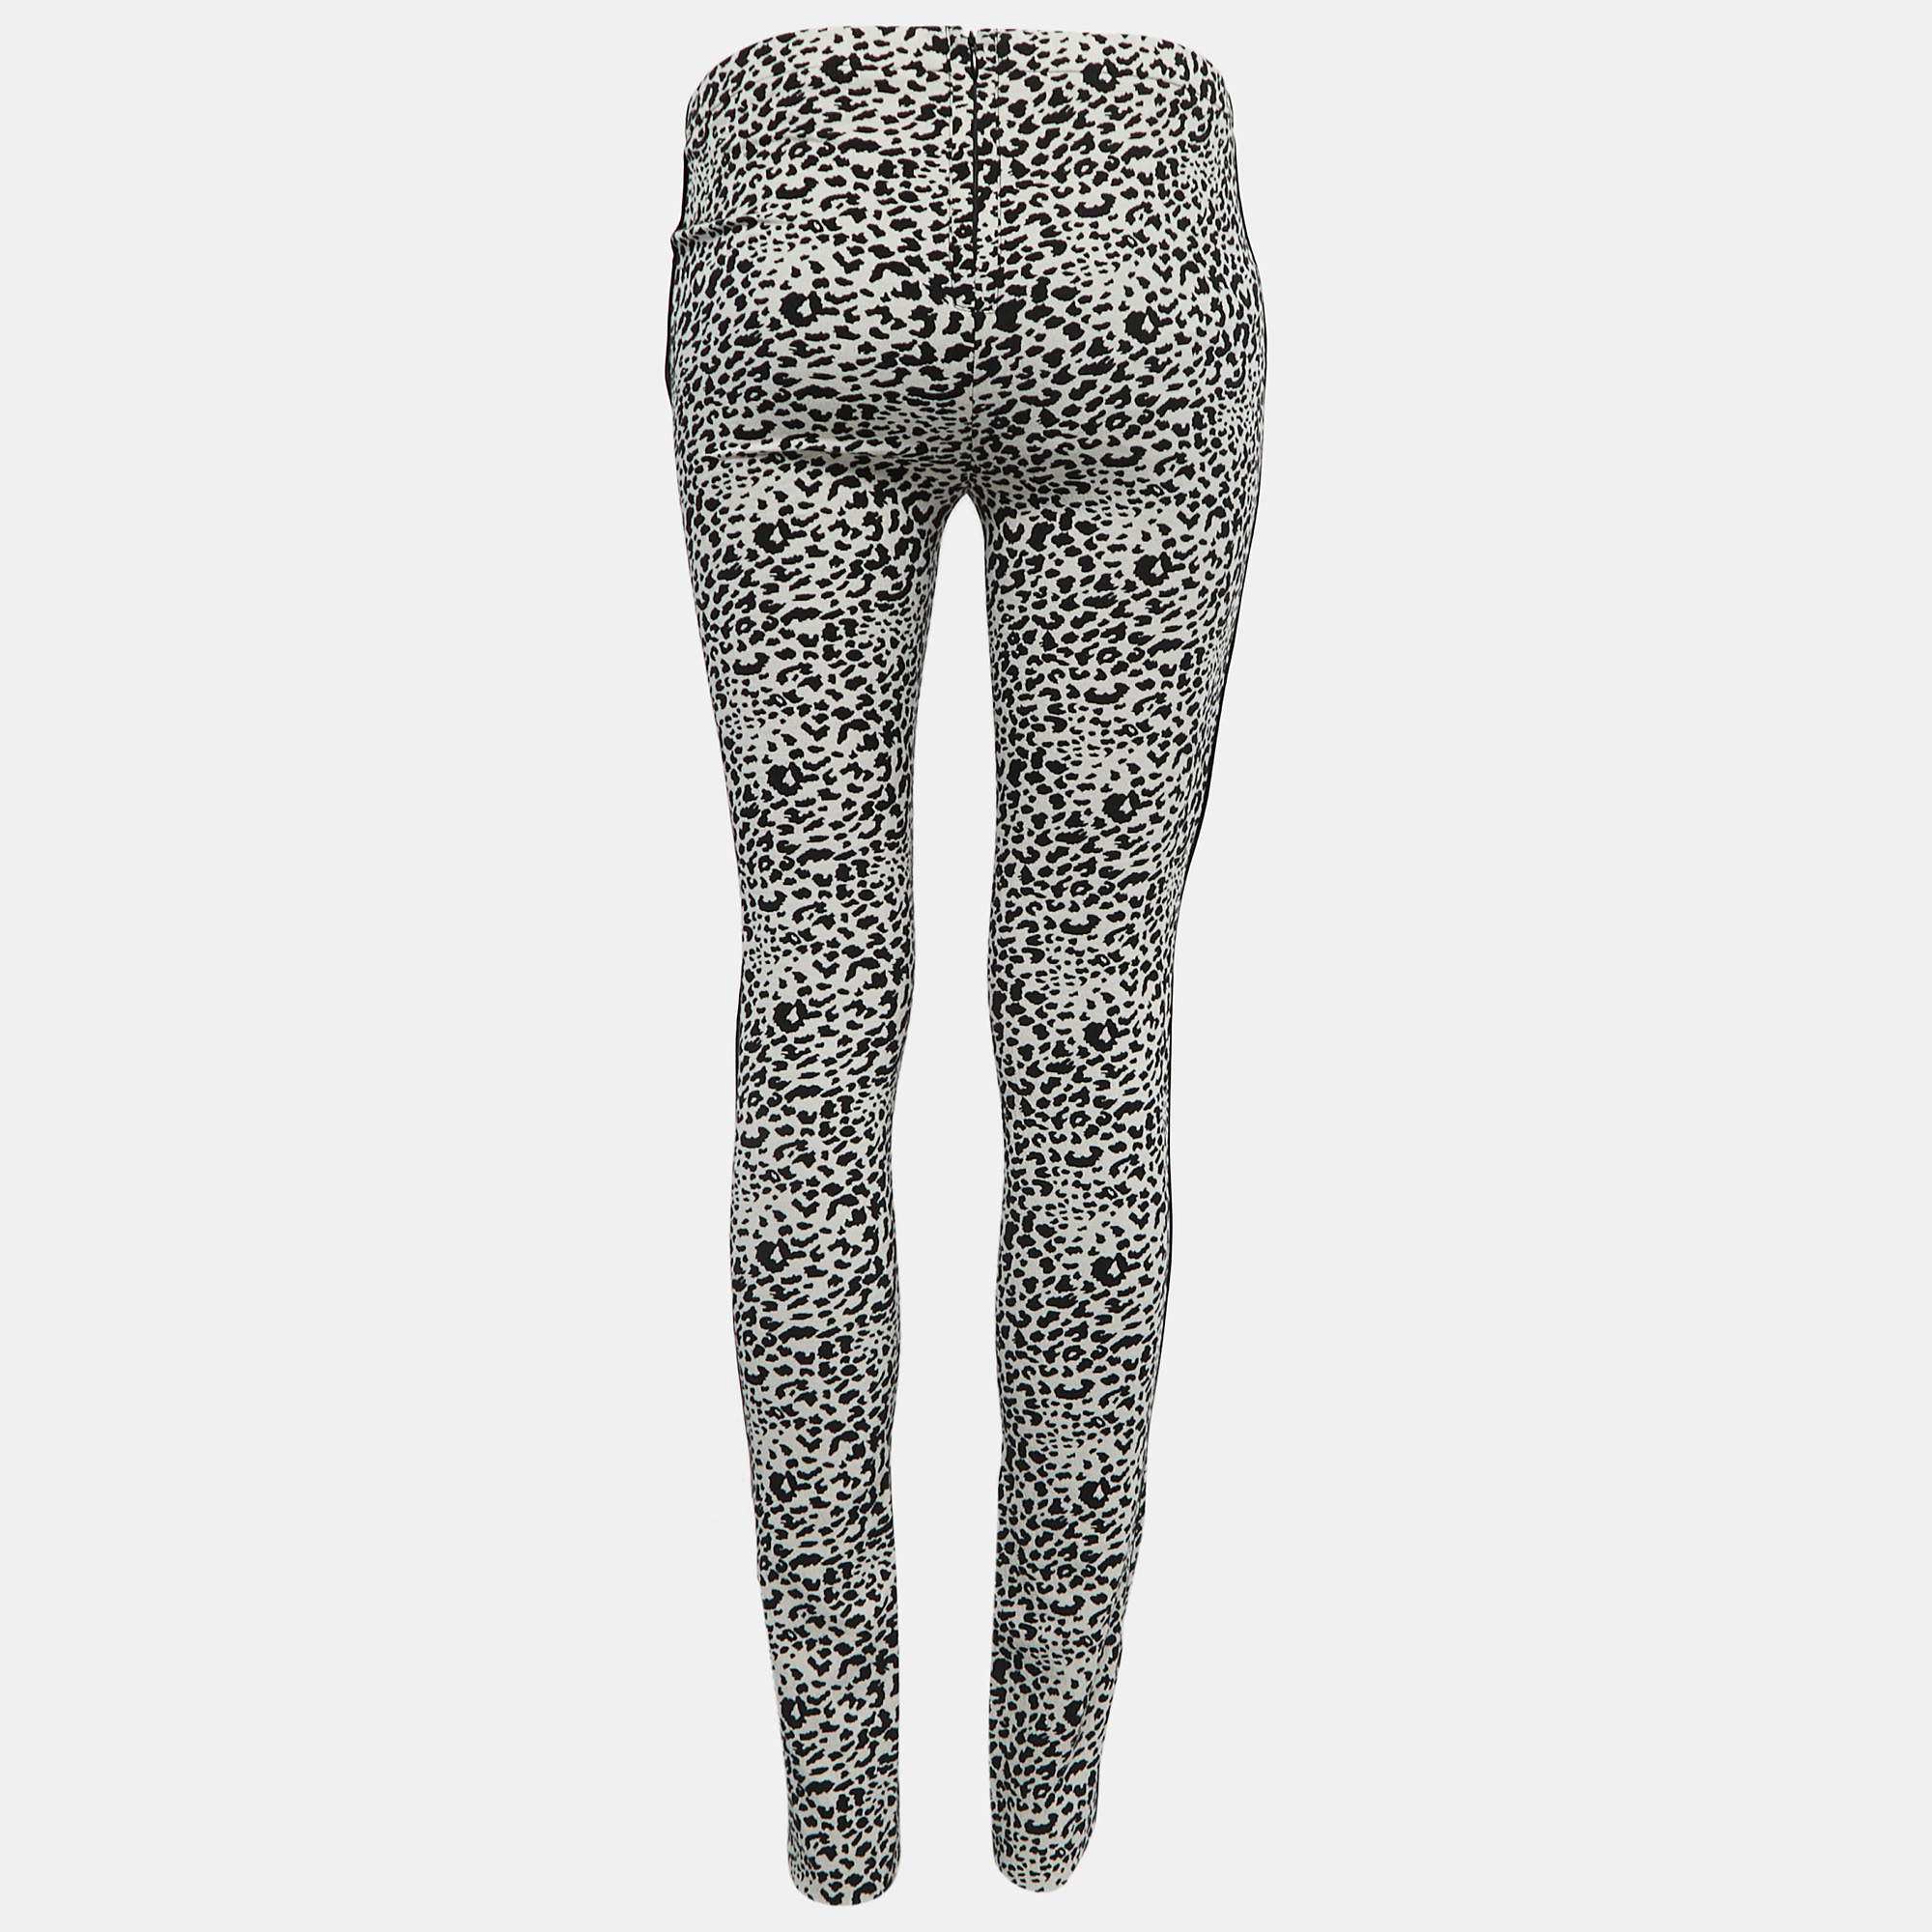 

Zadig & Voltaire Black/White Animal Printed Cotton Blend Skinny Pants